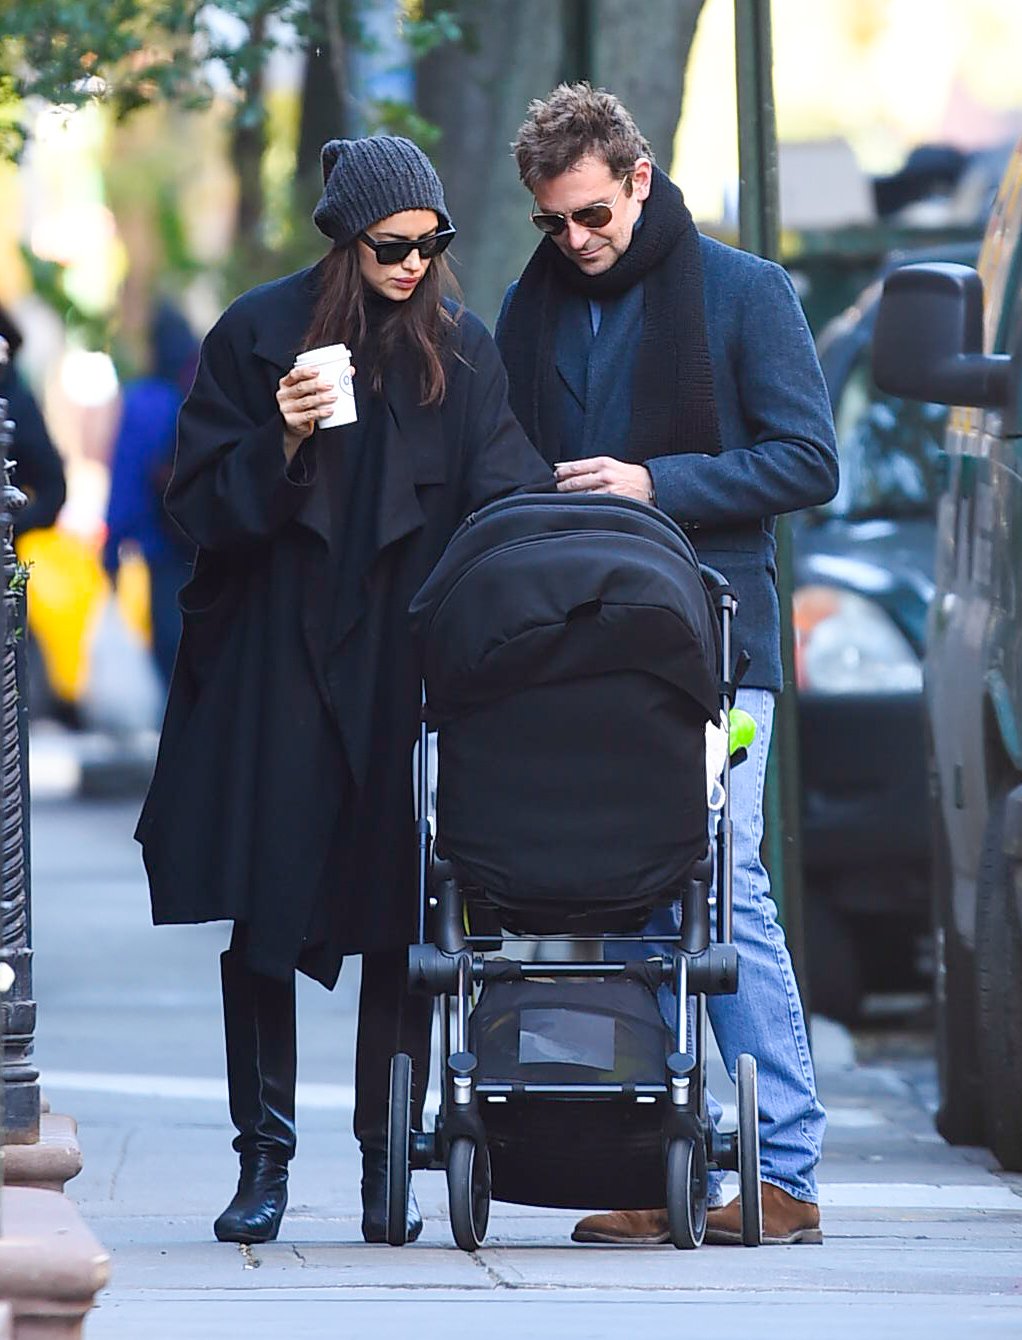 Bradley Cooper and Irina Shayk are seen walking in soho on October 24, 2018, in New York City. | Source: Getty Images